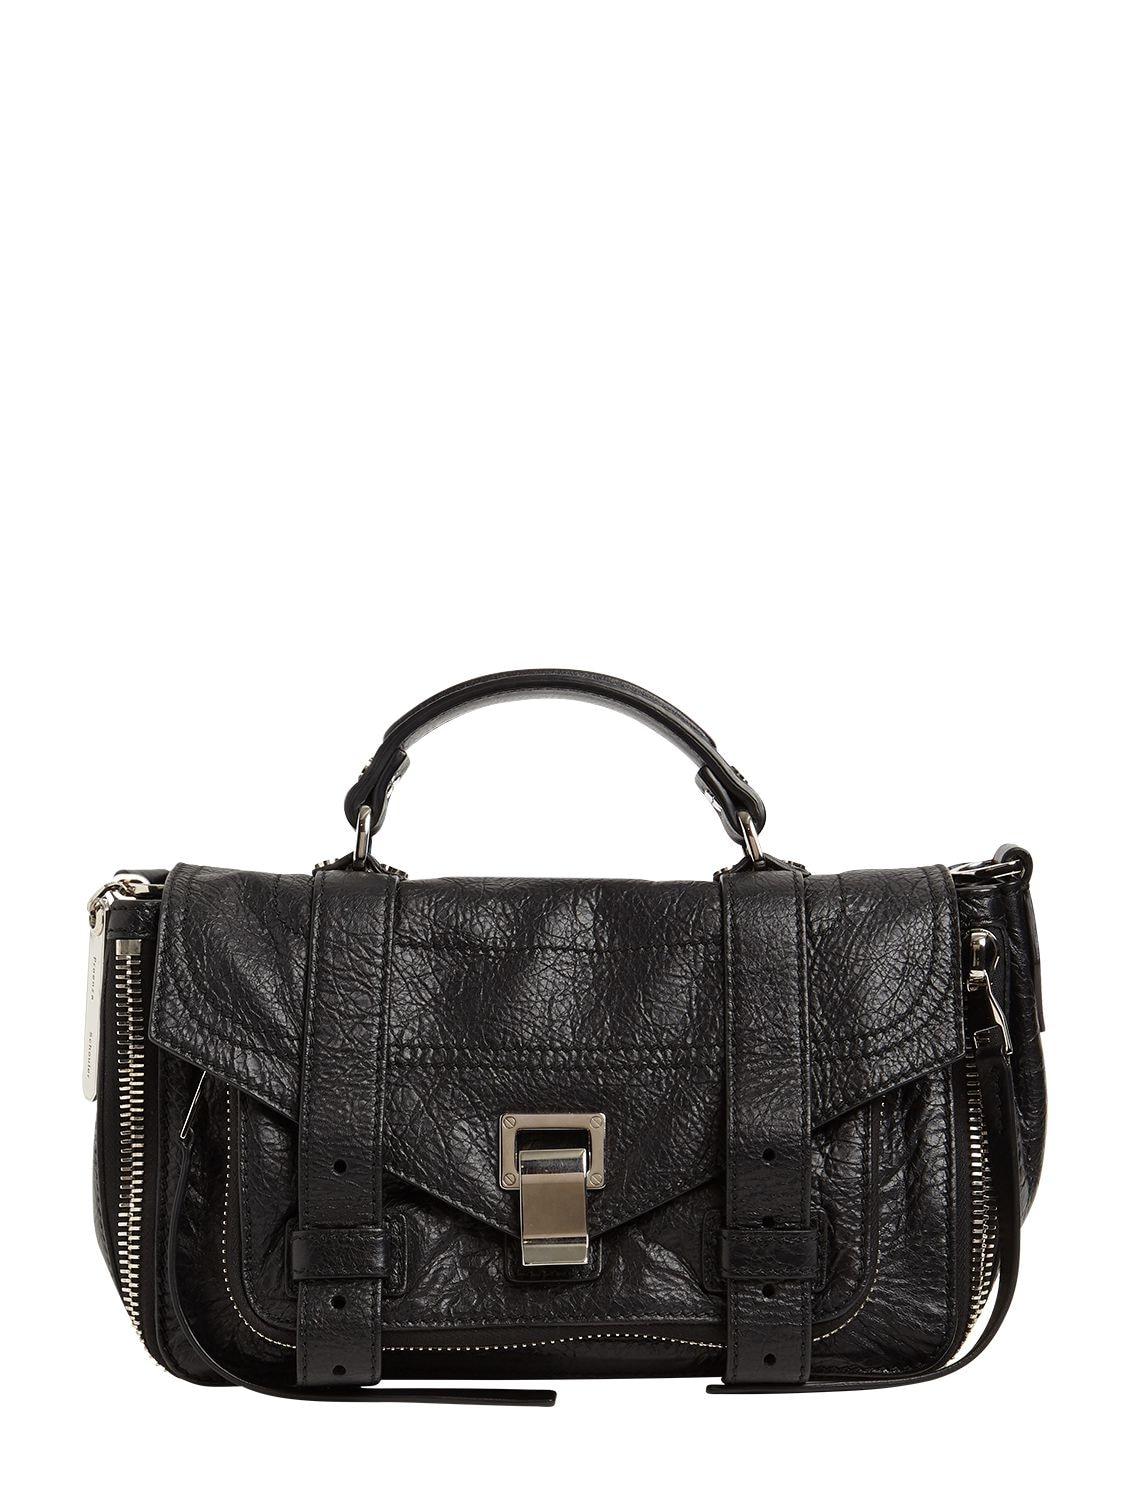 Proenza Schouler Ps1 Tiny Zipped Leather Top Handle Bag In Black